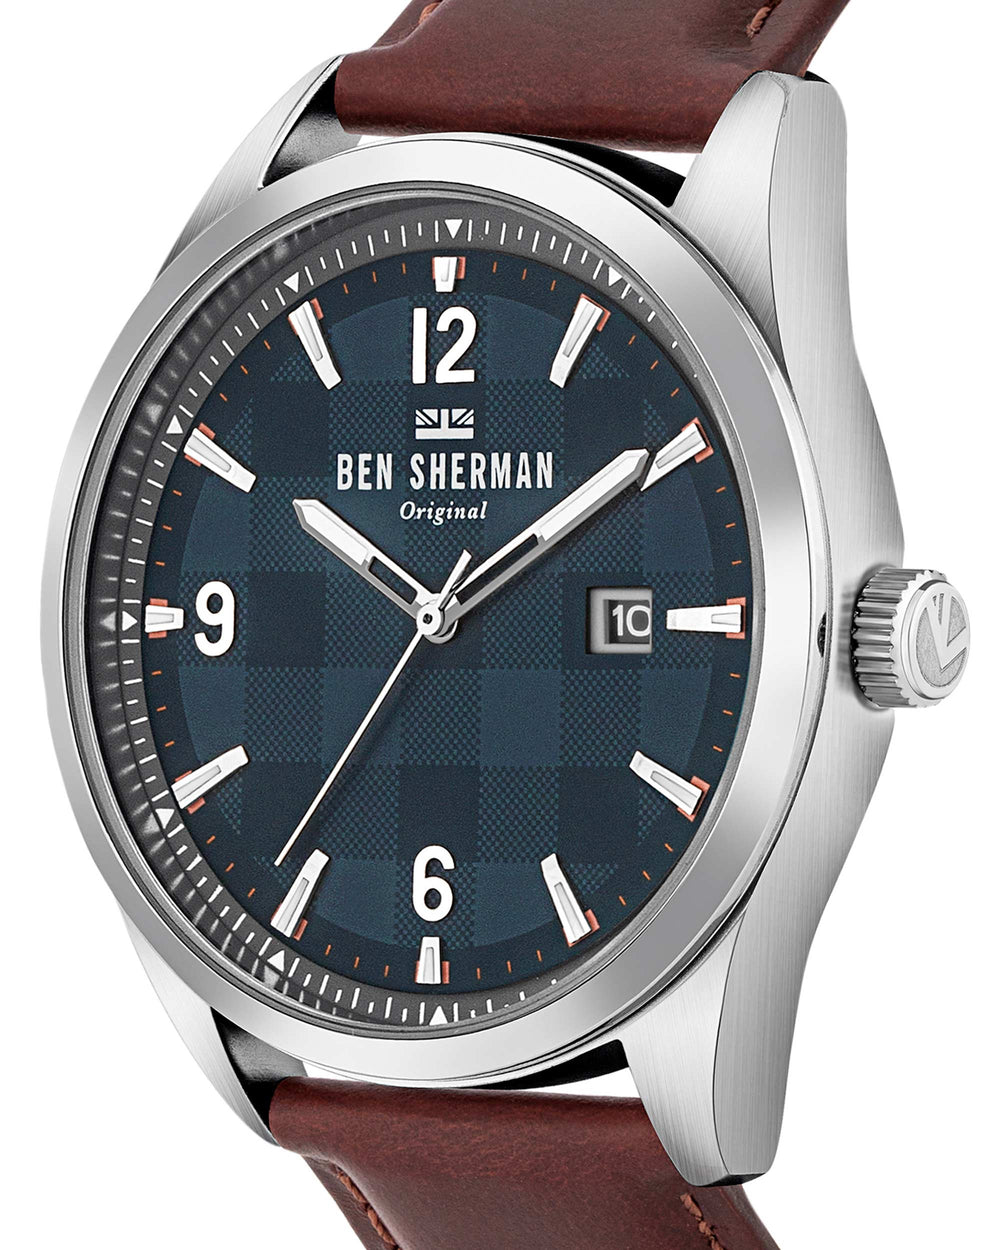 Men's Carnaby Check Watch - Brown/Navy/Silver